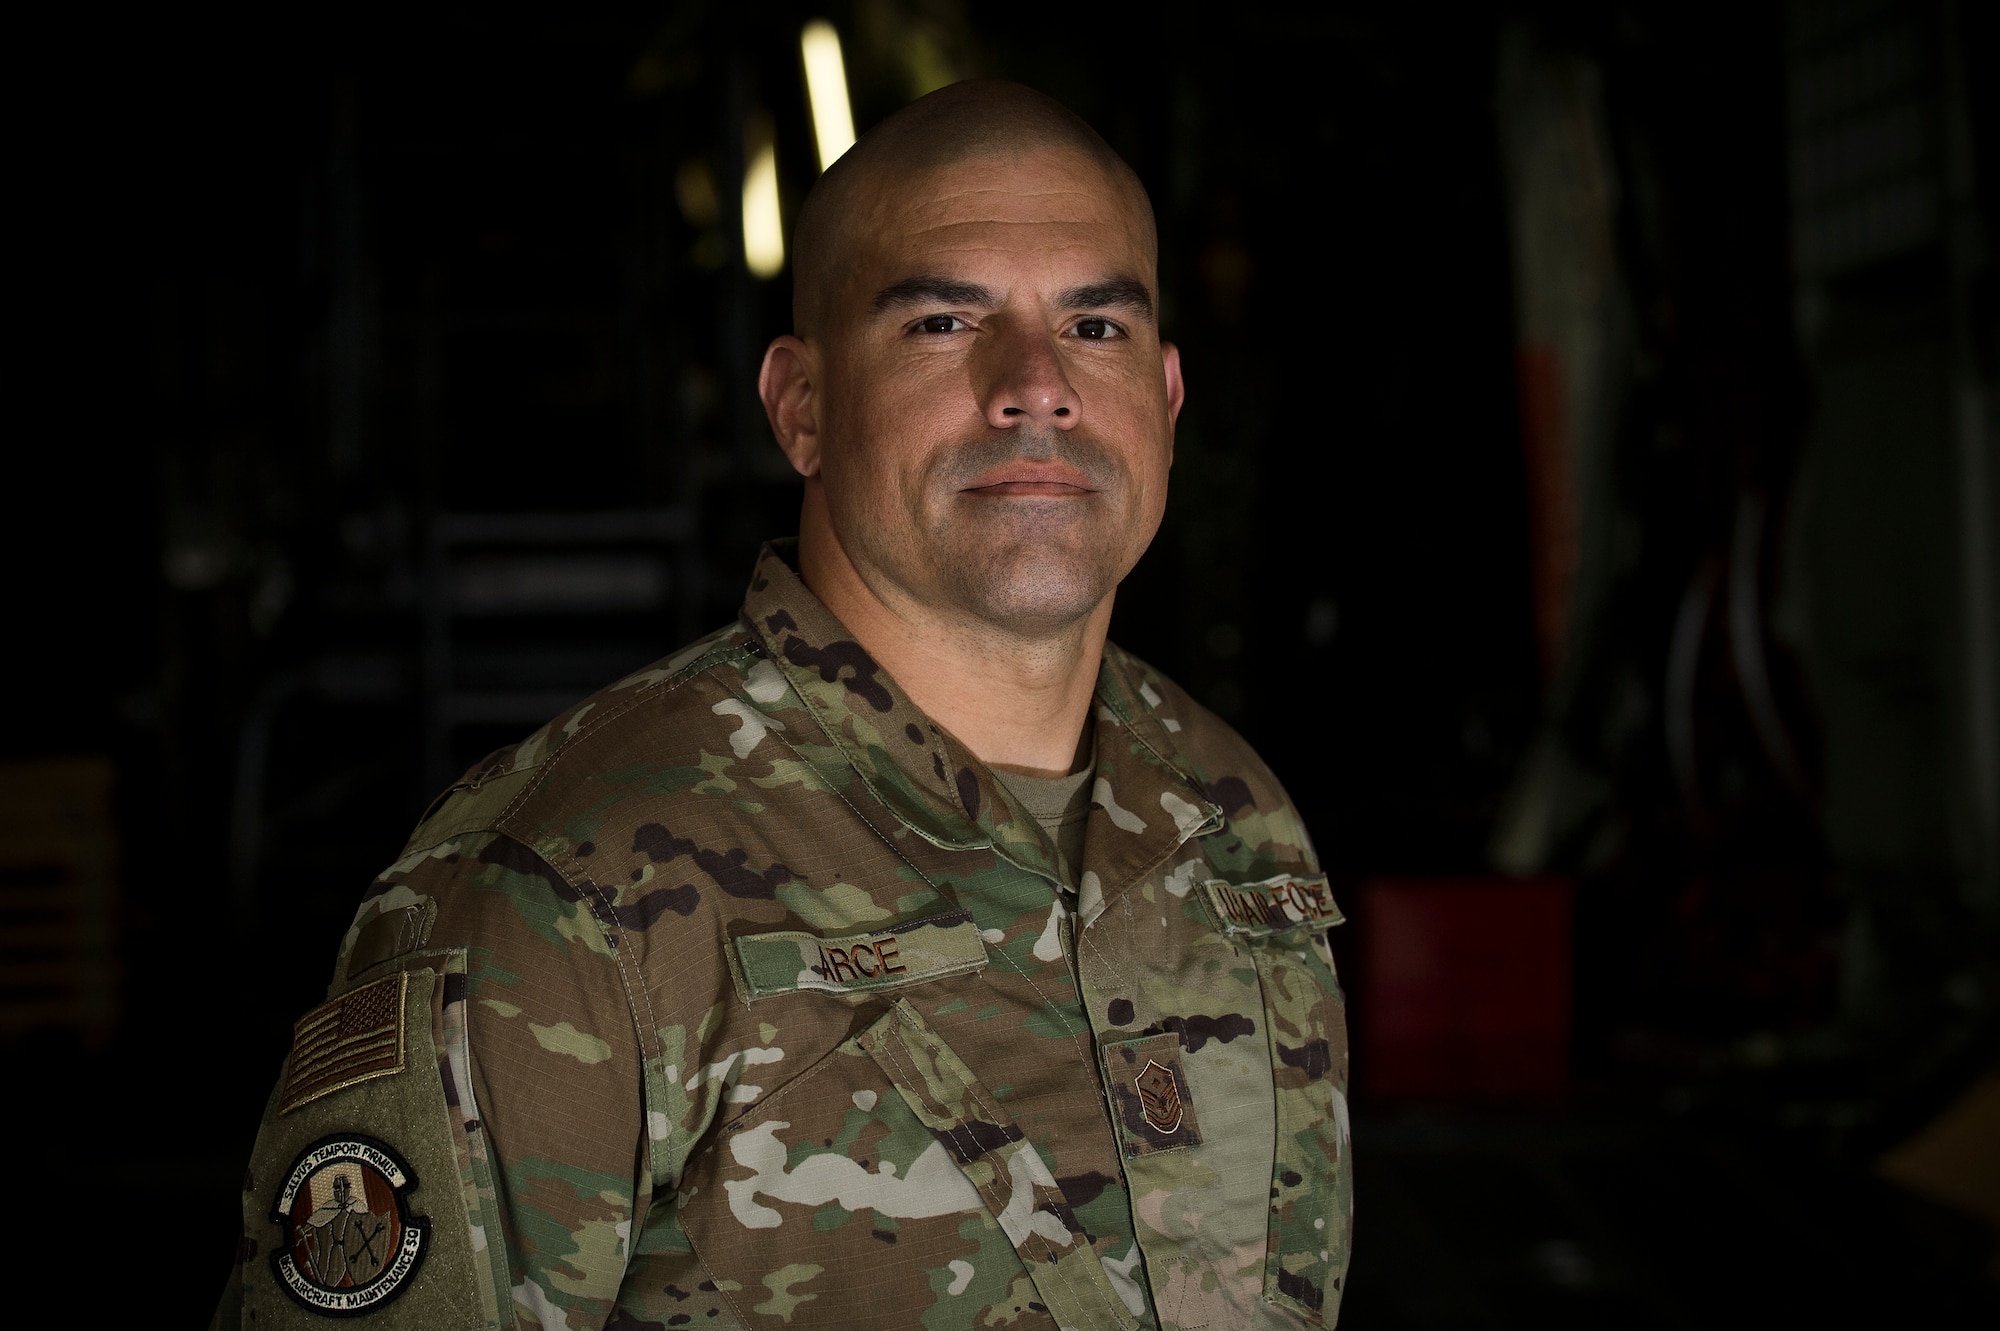 U.S. Air Force Master Sgt. Jorge L. Arce, 86th Maintenance Squadron first sergeant, poses for a photo in the dual-bay hangar at Ramstein Air Base, Germany, Oct. 8, 2019. Arce won the 2019 Bob Hope “Spirit of Hope” for the Air Force earlier this year and was presented his award at a ceremony held at the Pentagon, Virginia, Sept. 27, 2019. (U.S. Air Force photo by Staff Sgt. Jonathan Bass)